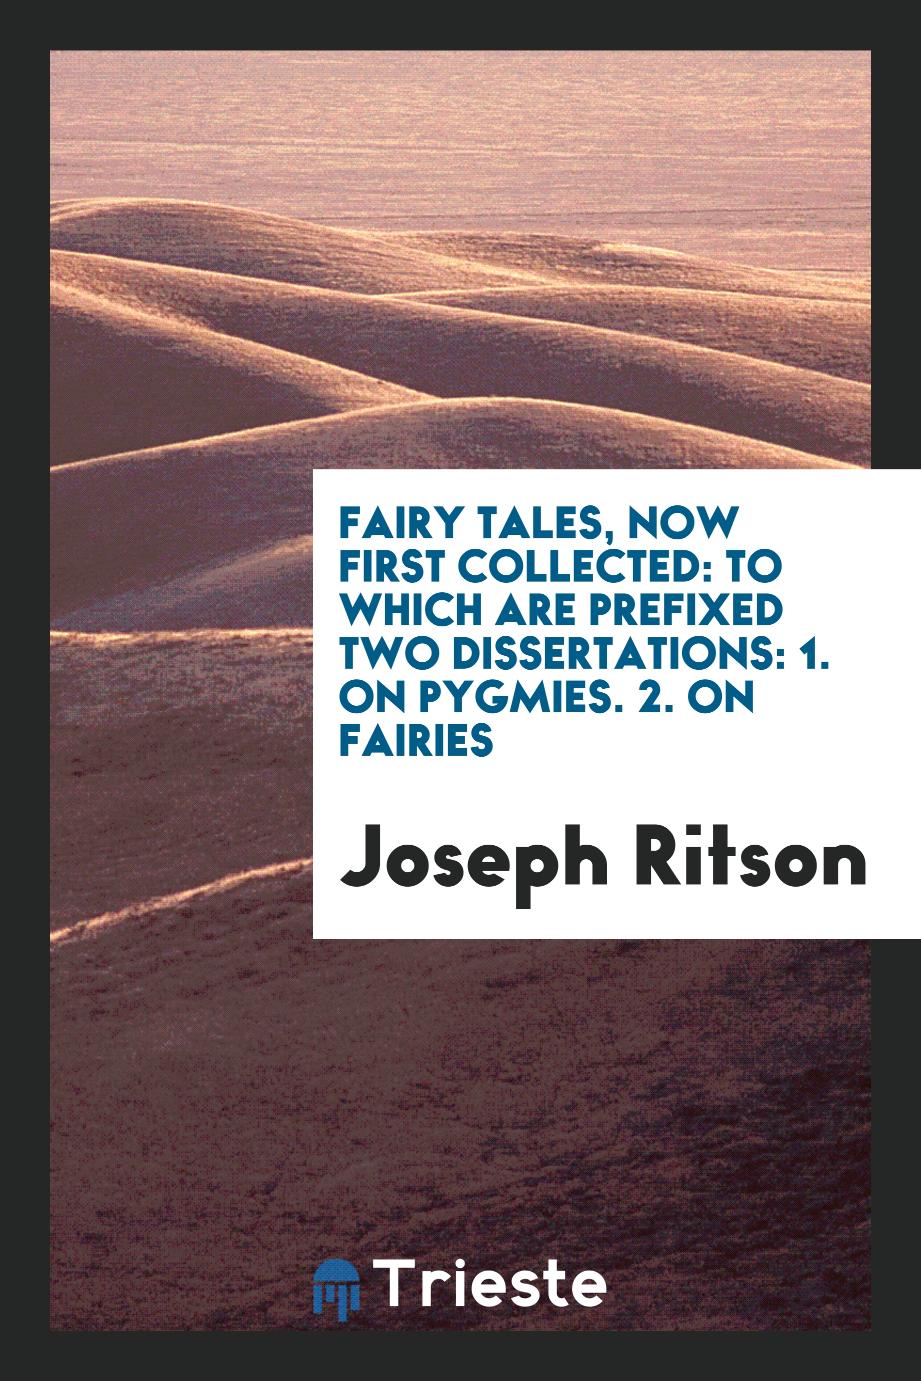 Fairy tales, now first collected: to which are prefixed two dissertations: 1. On pygmies. 2. On fairies